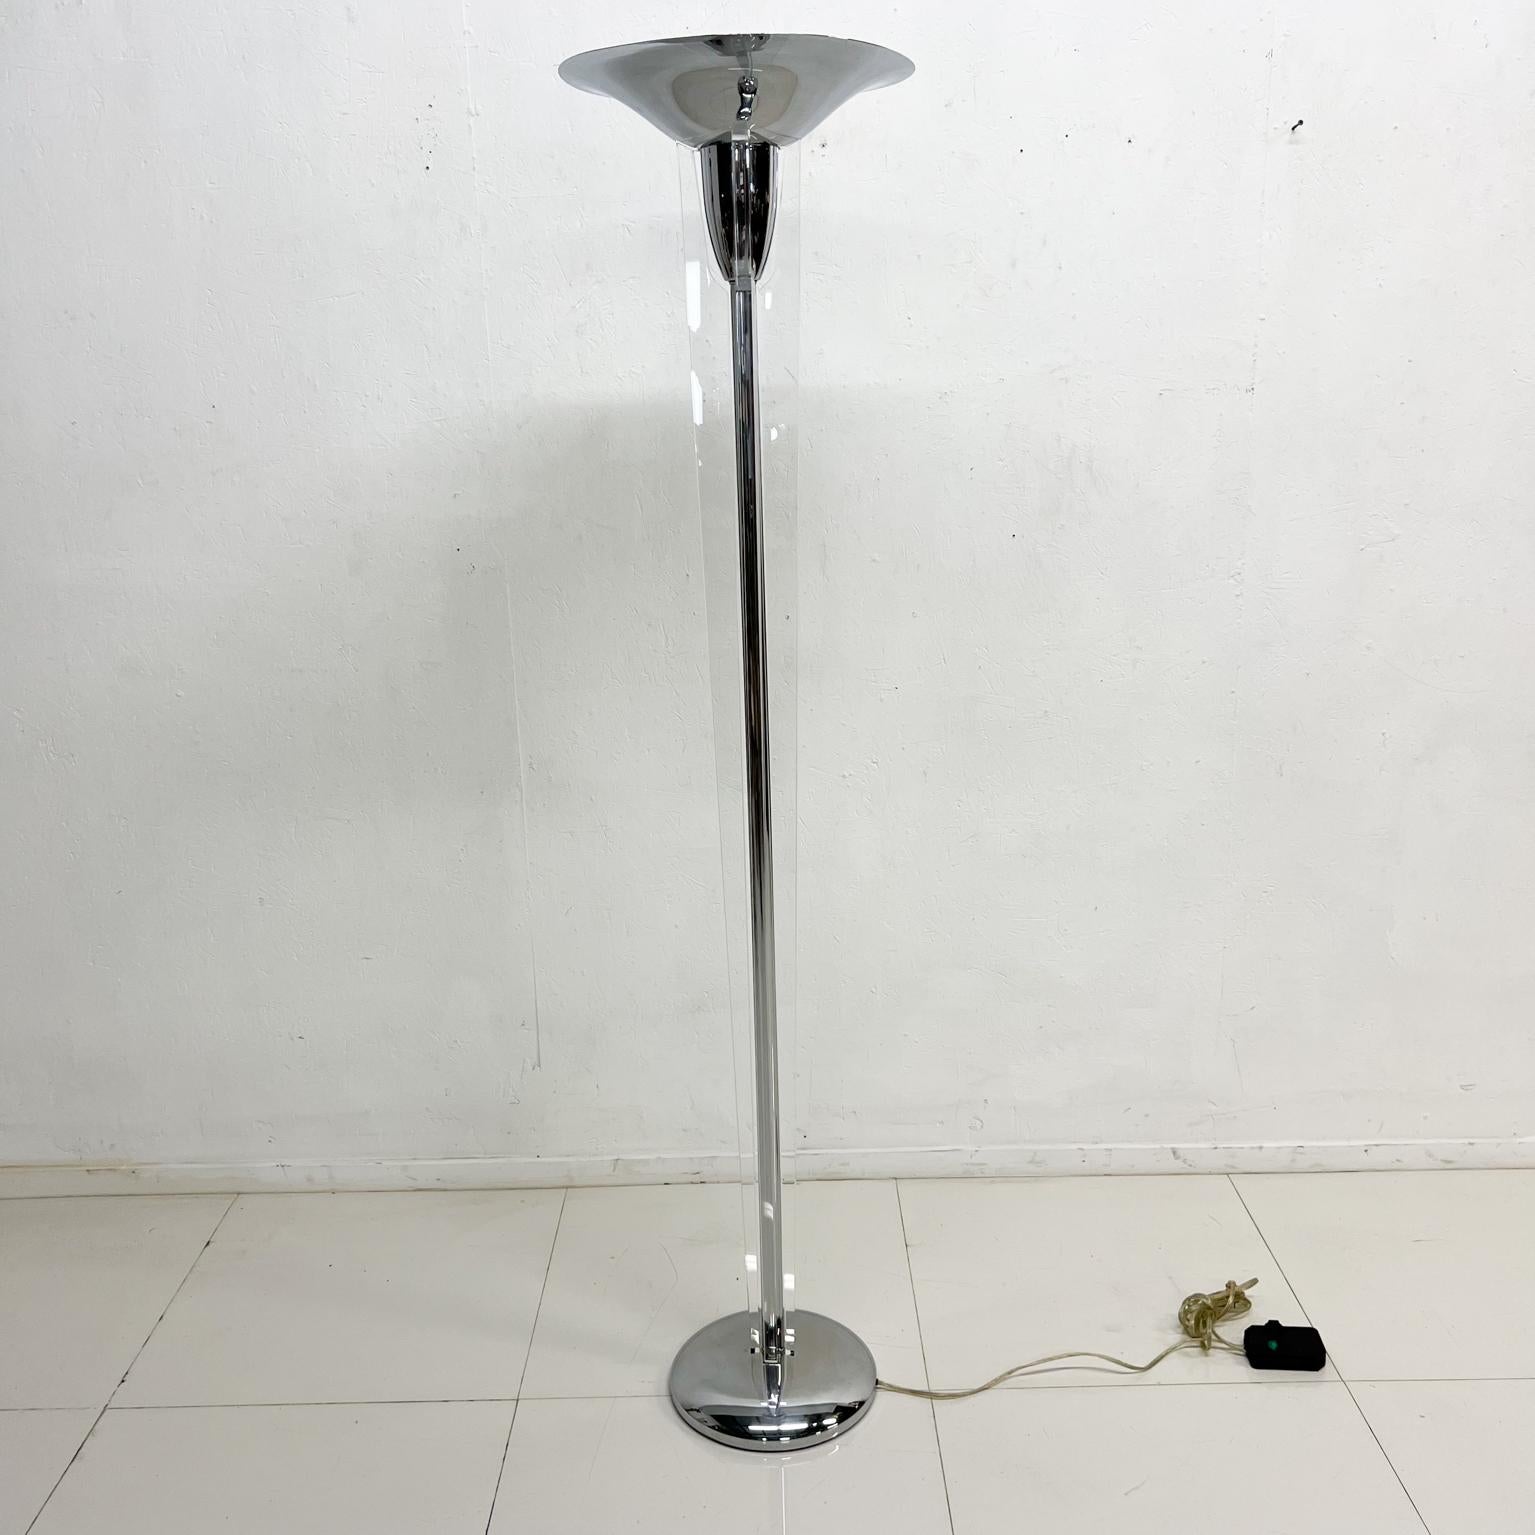 American Art Deco Moderne Chrome Torchiere Floor Lamp by Boyd Lighting Company For Sale